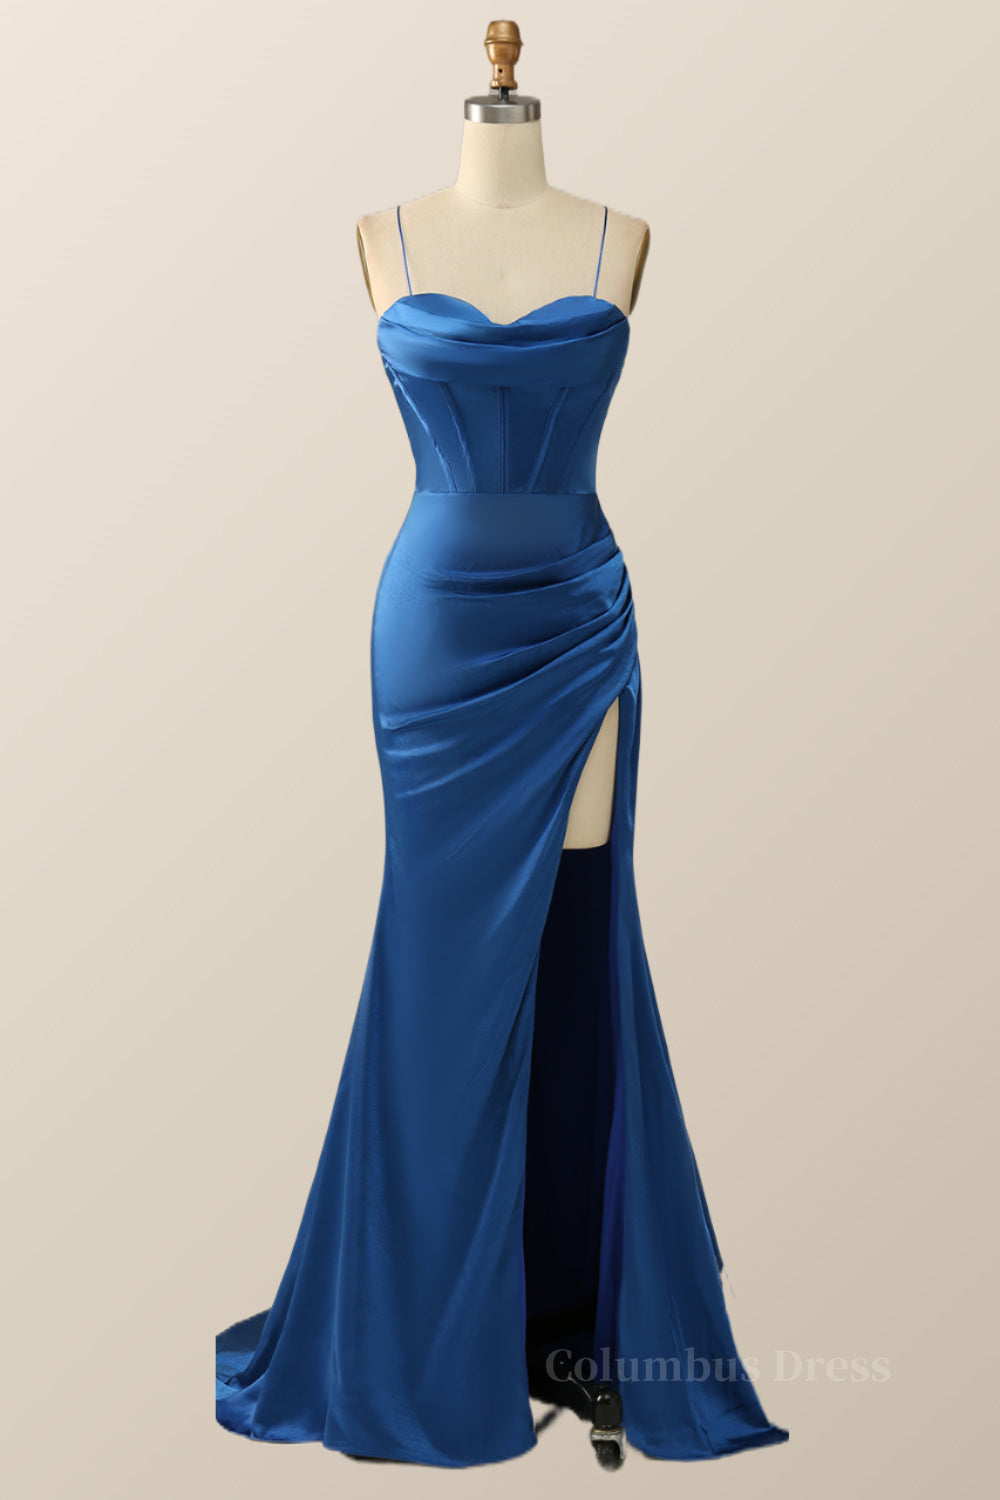 Party Dress A Line, Royal Blue Mermaid Straps Long Dress with Slit